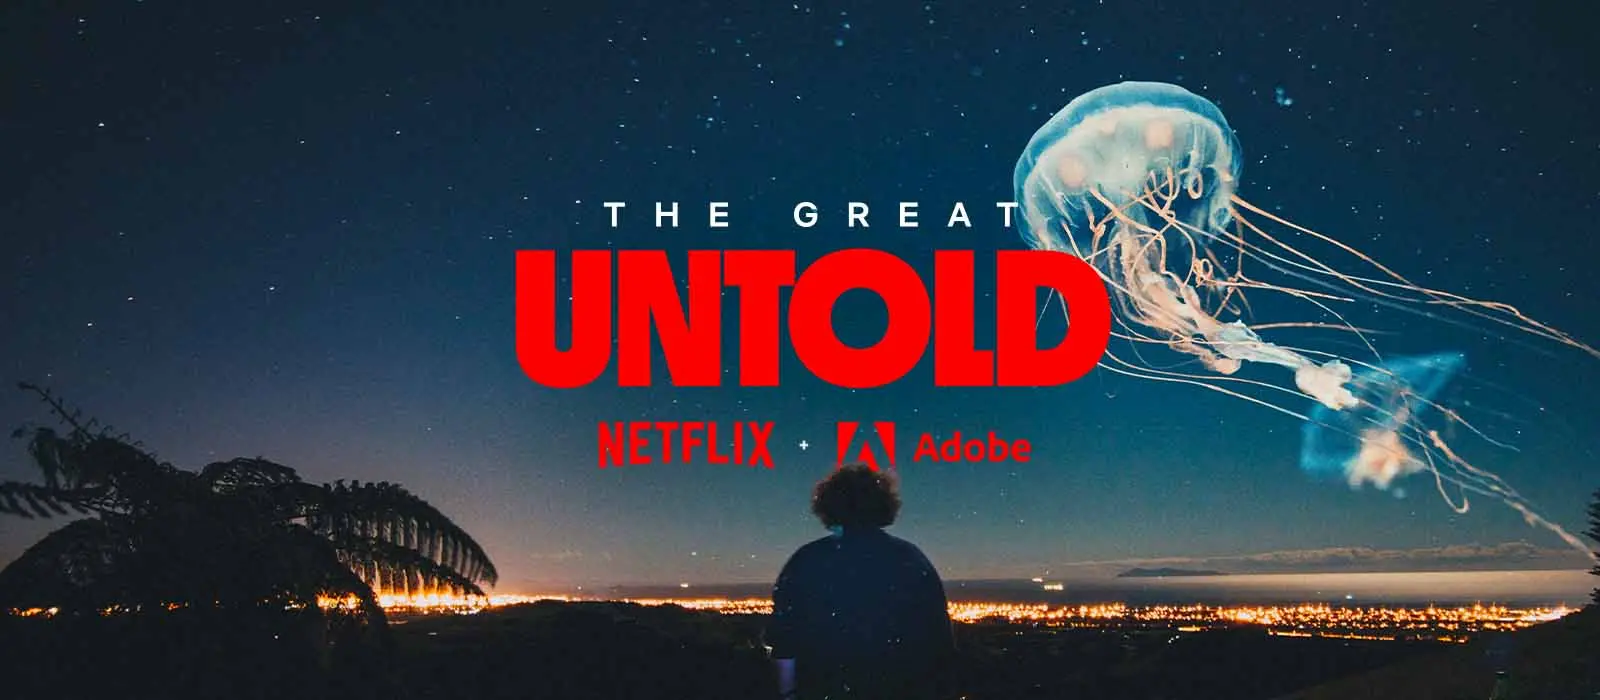 Adobe And Netflix Bring The Great Untold Stories To Life